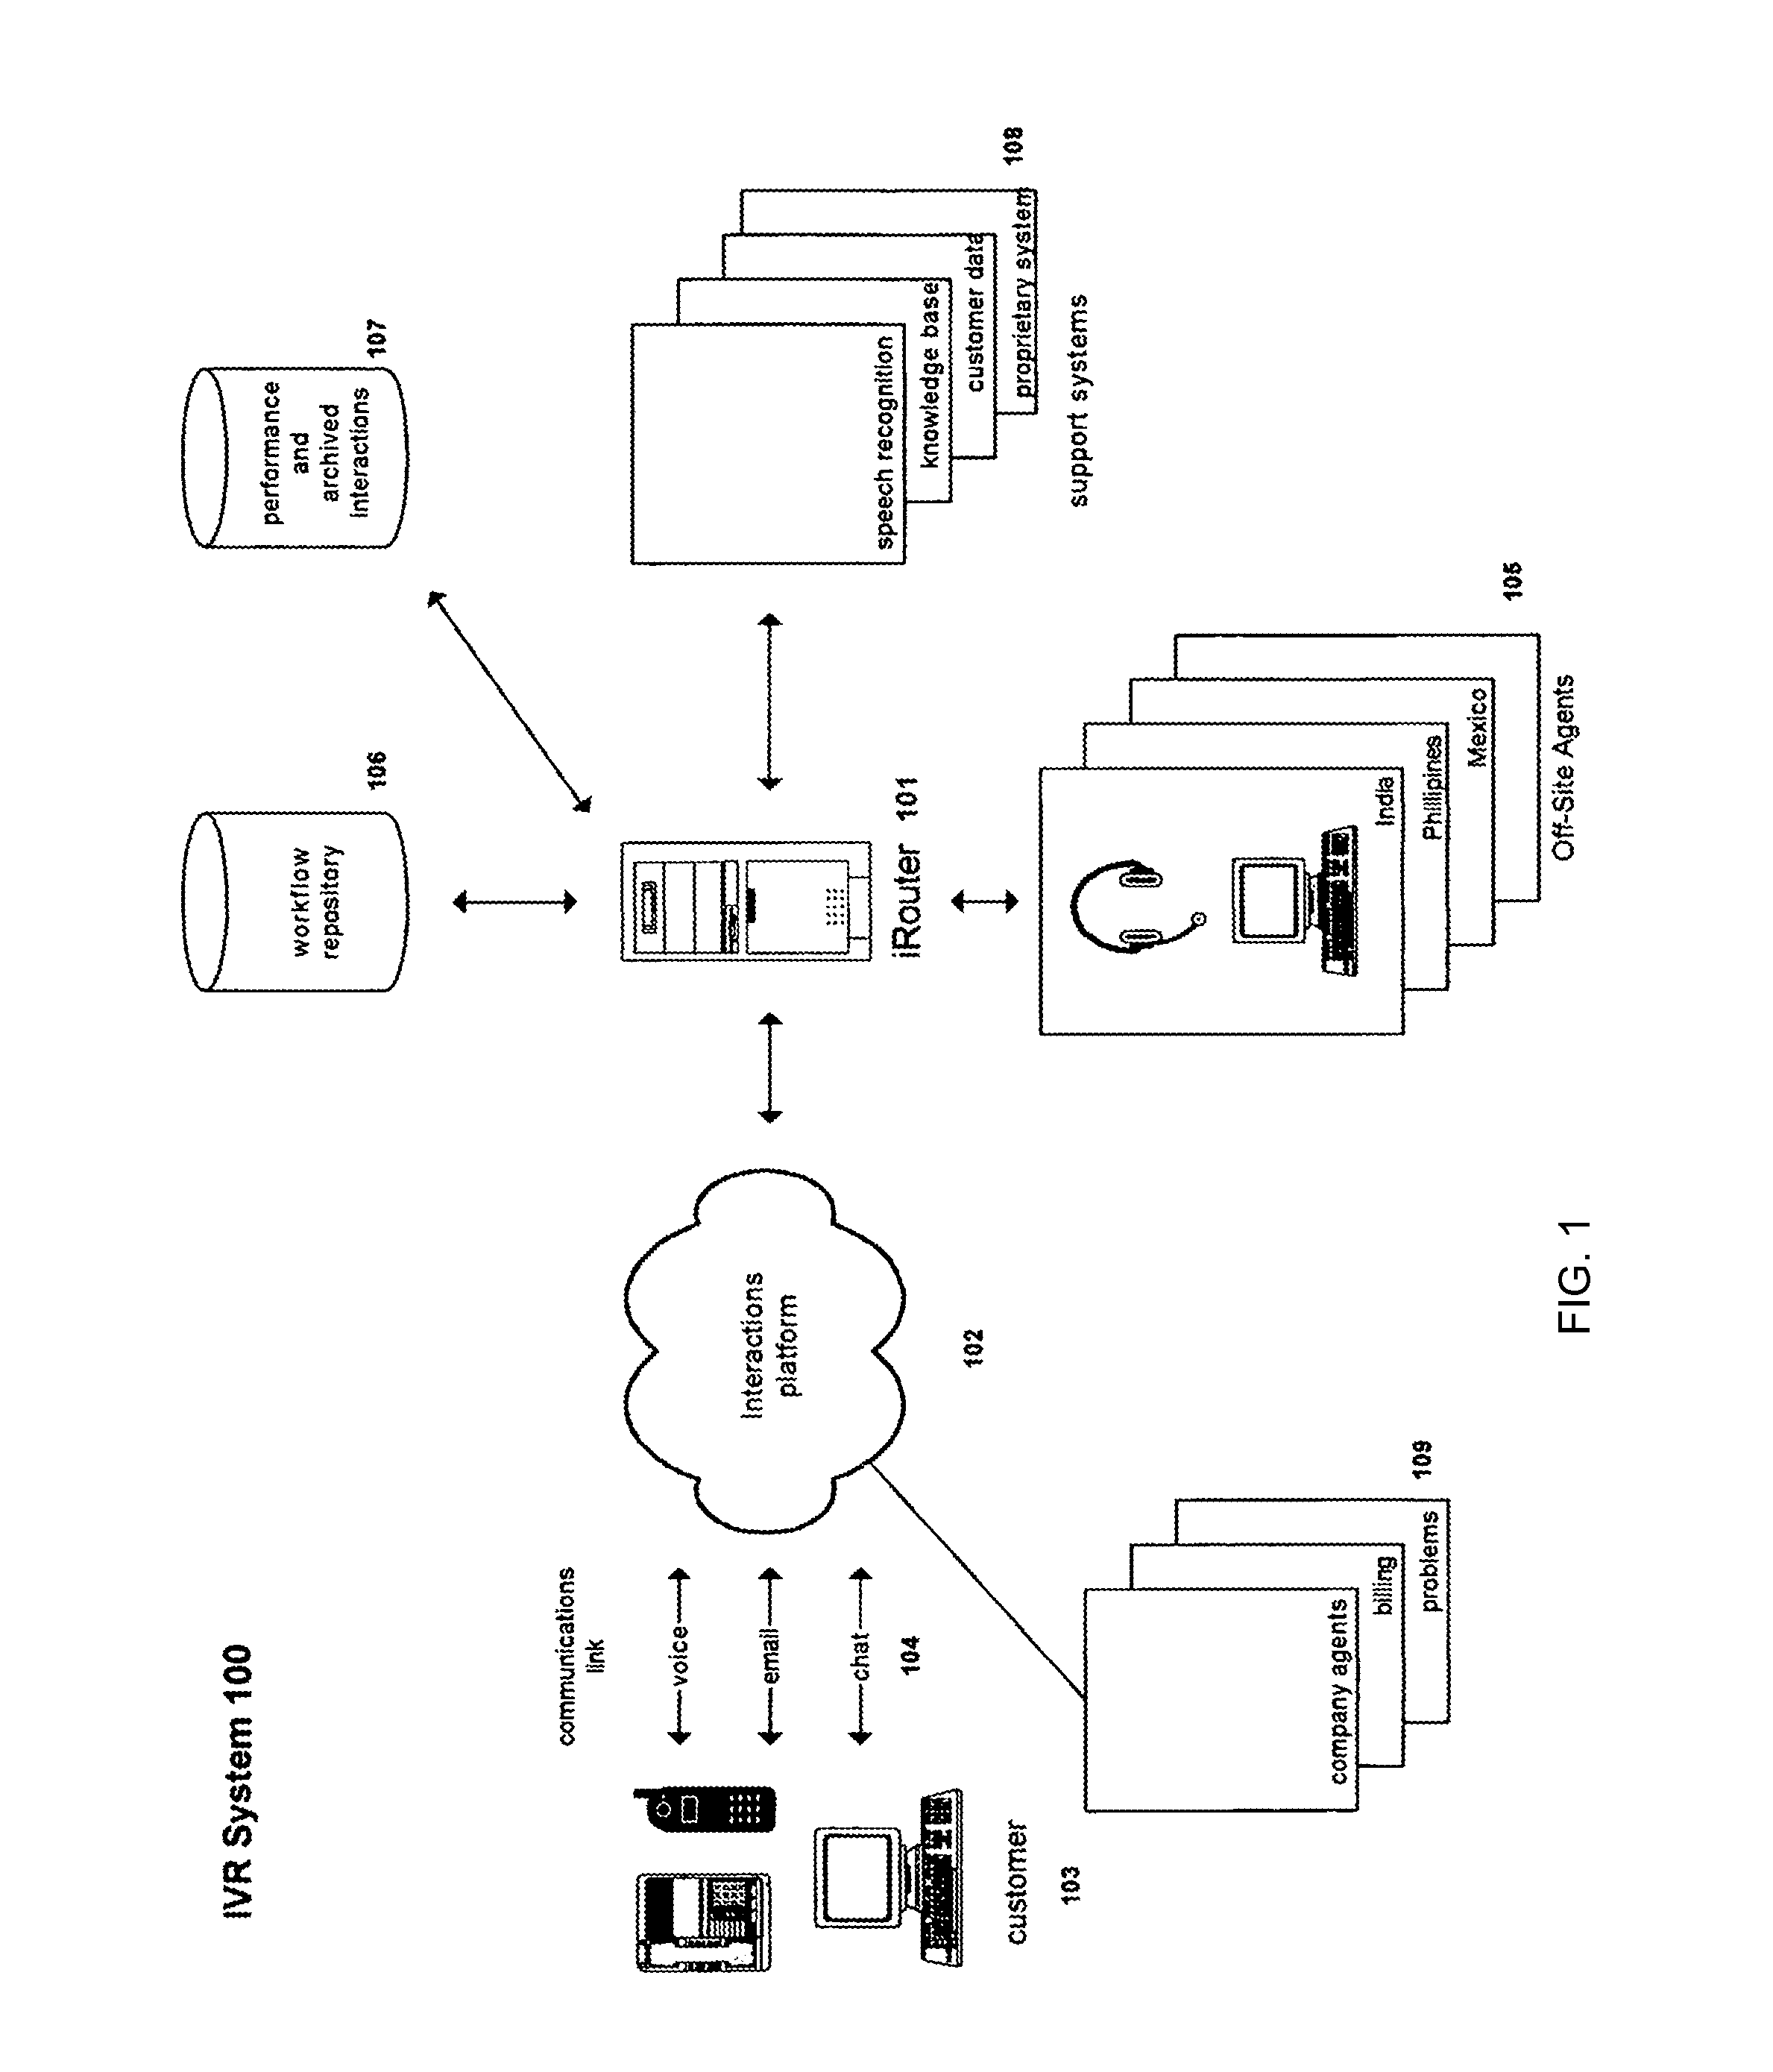 Automated speech recognition system for natural language understanding